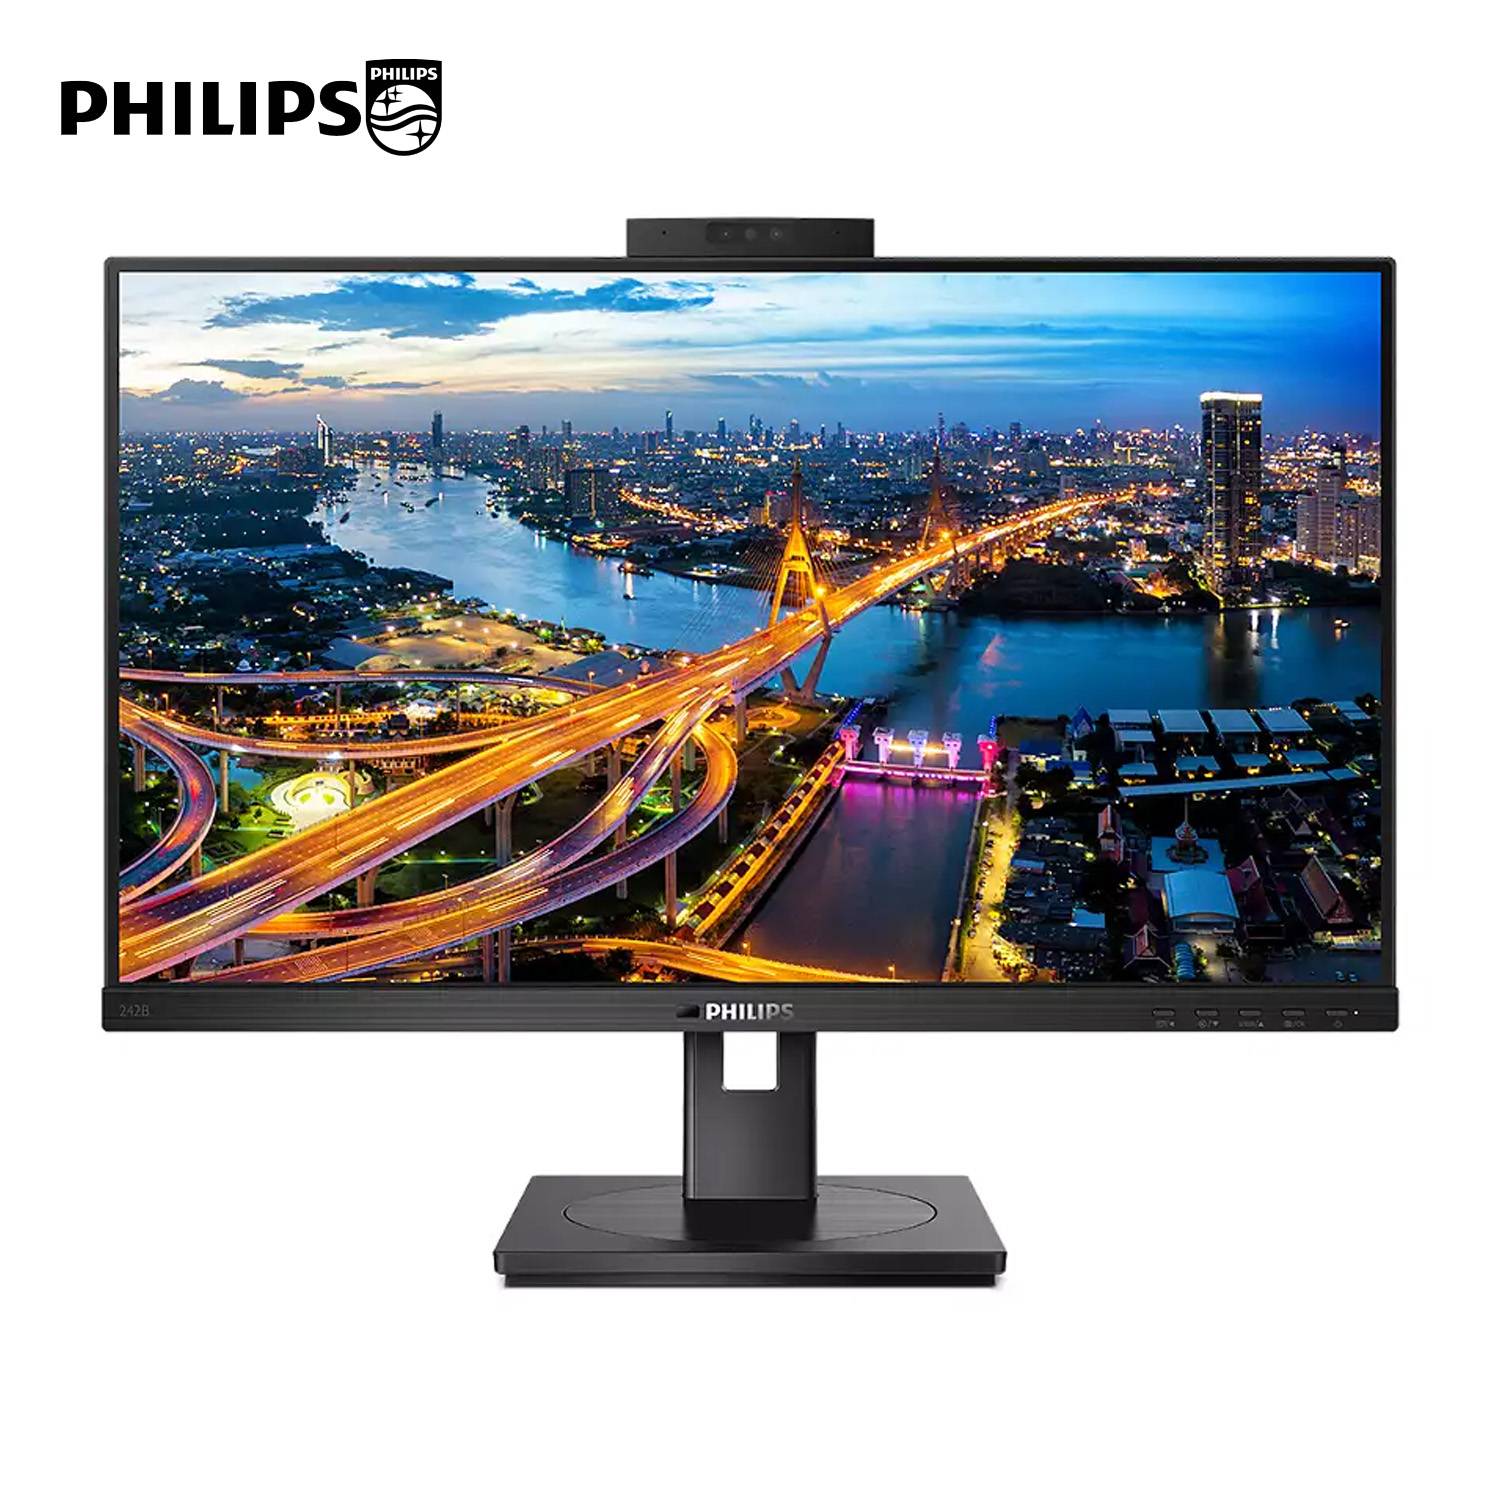 Monitor Philips 238 LCD FHD WEBCAM 242B1H. PHILIPS